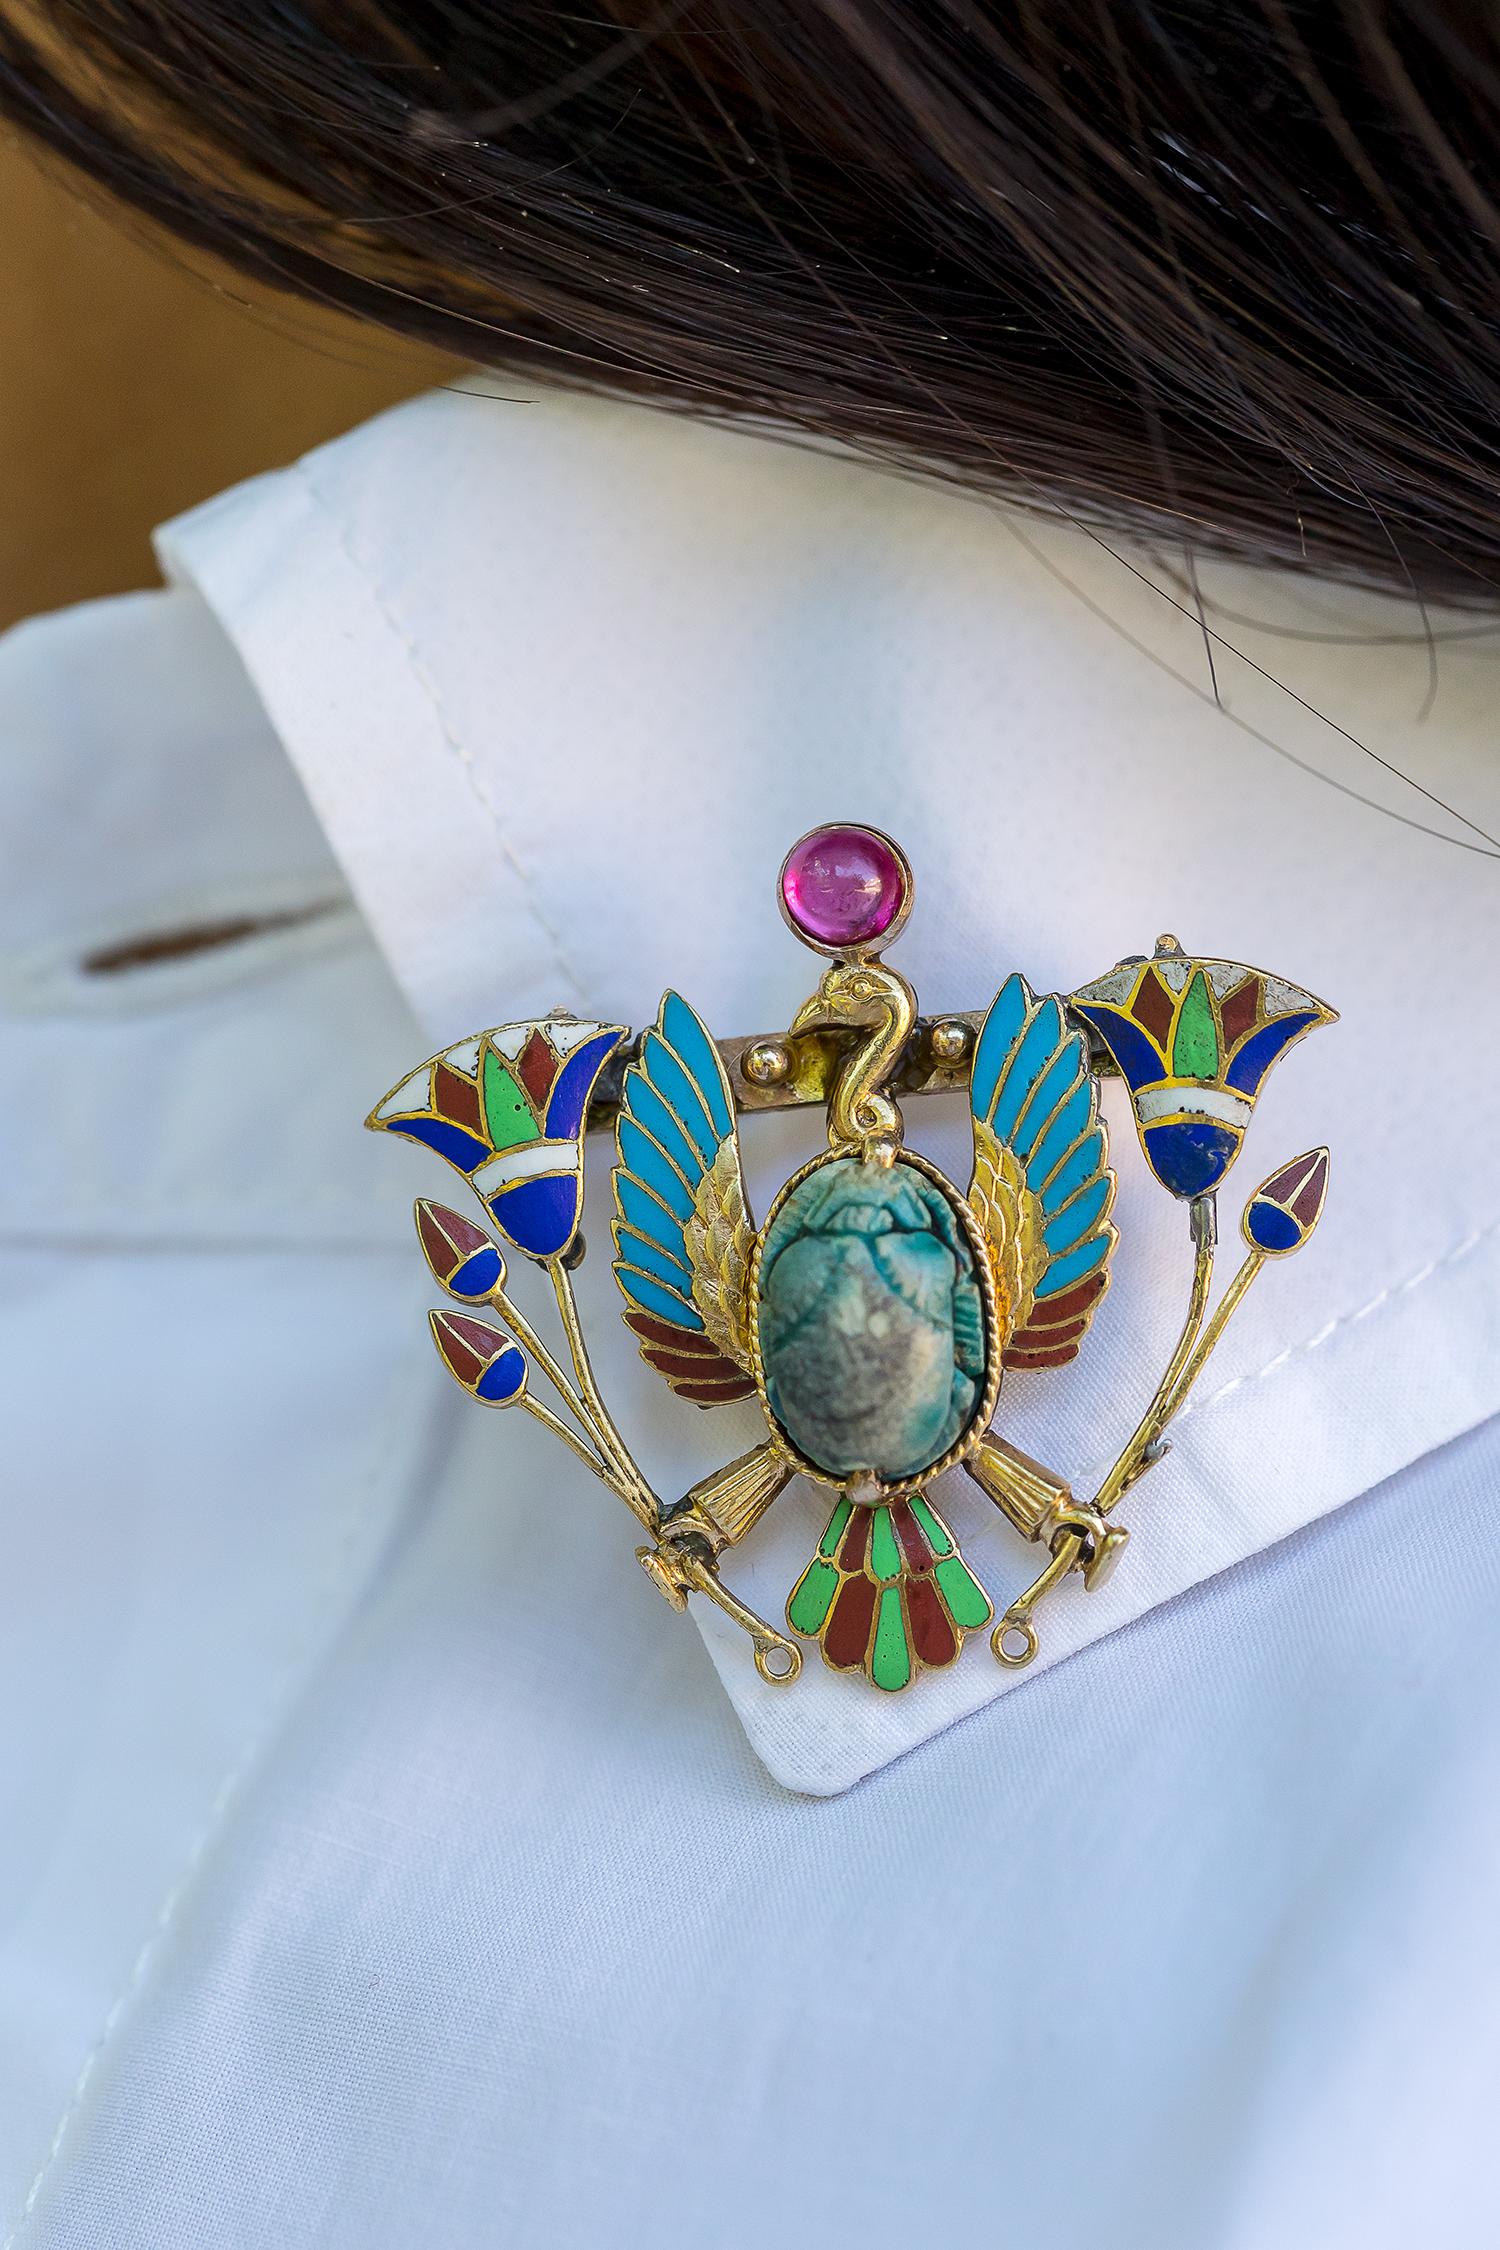 An early 20th century Egyptian Revival gold brooch, depicting a vulture centred with a faïence scarab, clutching lotus pods and surmounted with a cabochon ruby, polychrome enamel decoration overall and engraved to reverse, 3.5cm wide. One arrow